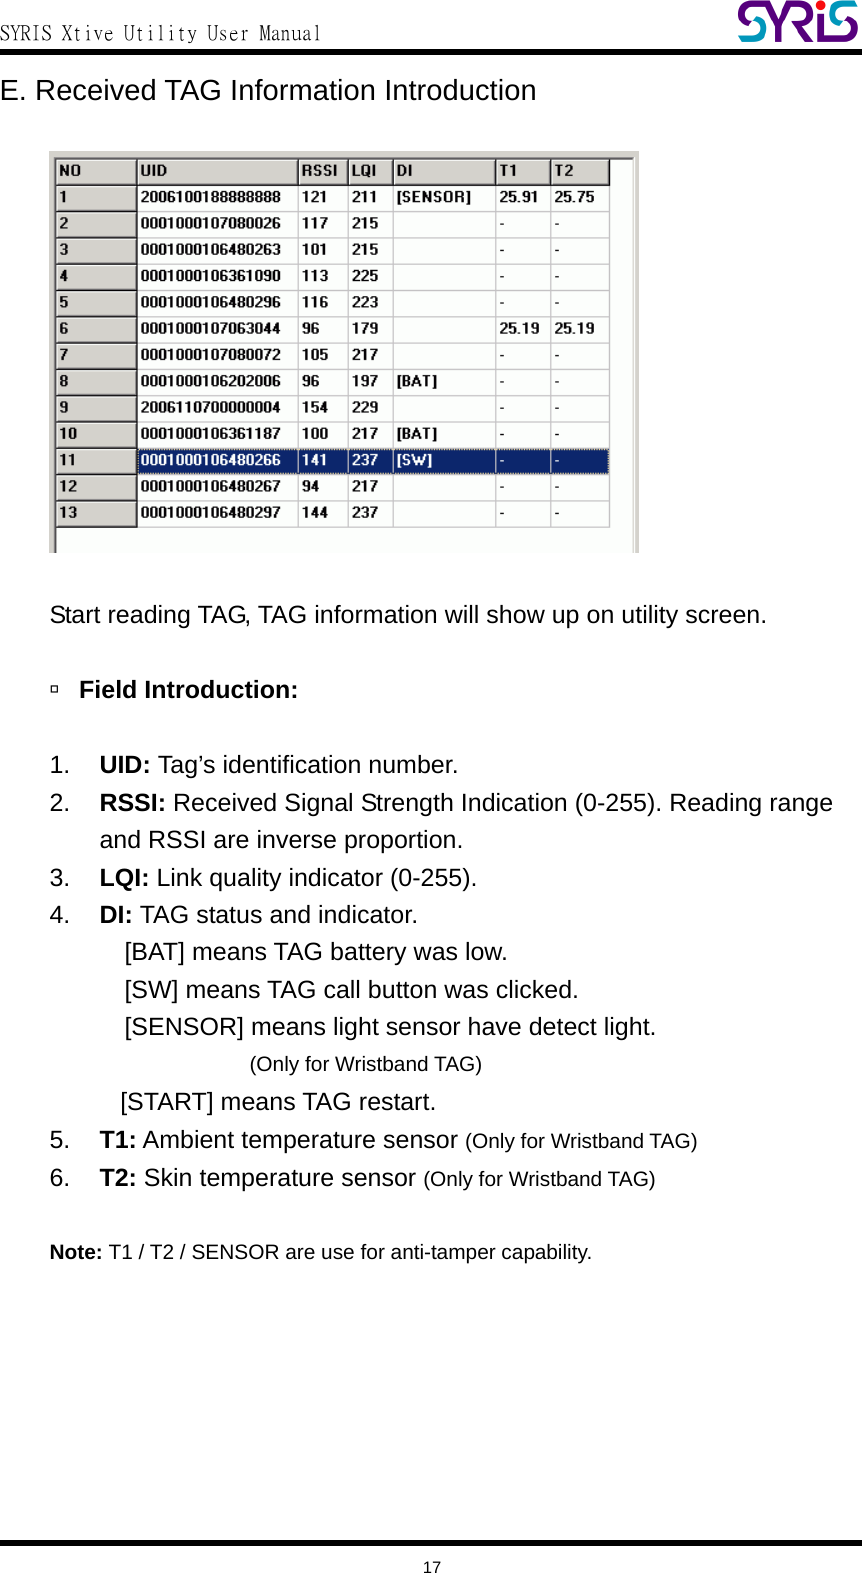  SYRIS Xtive Utility User Manual  E. Received TAG Information Introduction    Start reading TAG, TAG information will show up on utility screen.    à Field Introduction:  1.  UID: Tag’s identification number. 2.  RSSI: Received Signal Strength Indication (0-255). Reading range and RSSI are inverse proportion. 3.  LQI: Link quality indicator (0-255). 4.  DI: TAG status and indicator.     [BAT] means TAG battery was low.     [SW] means TAG call button was clicked.   [SENSOR] means light sensor have detect light.               (Only for Wristband TAG)   [START] means TAG restart. 5.  T1: Ambient temperature sensor (Only for Wristband TAG) 6.  T2: Skin temperature sensor (Only for Wristband TAG)  Note: T1 / T2 / SENSOR are use for anti-tamper capability.   17 